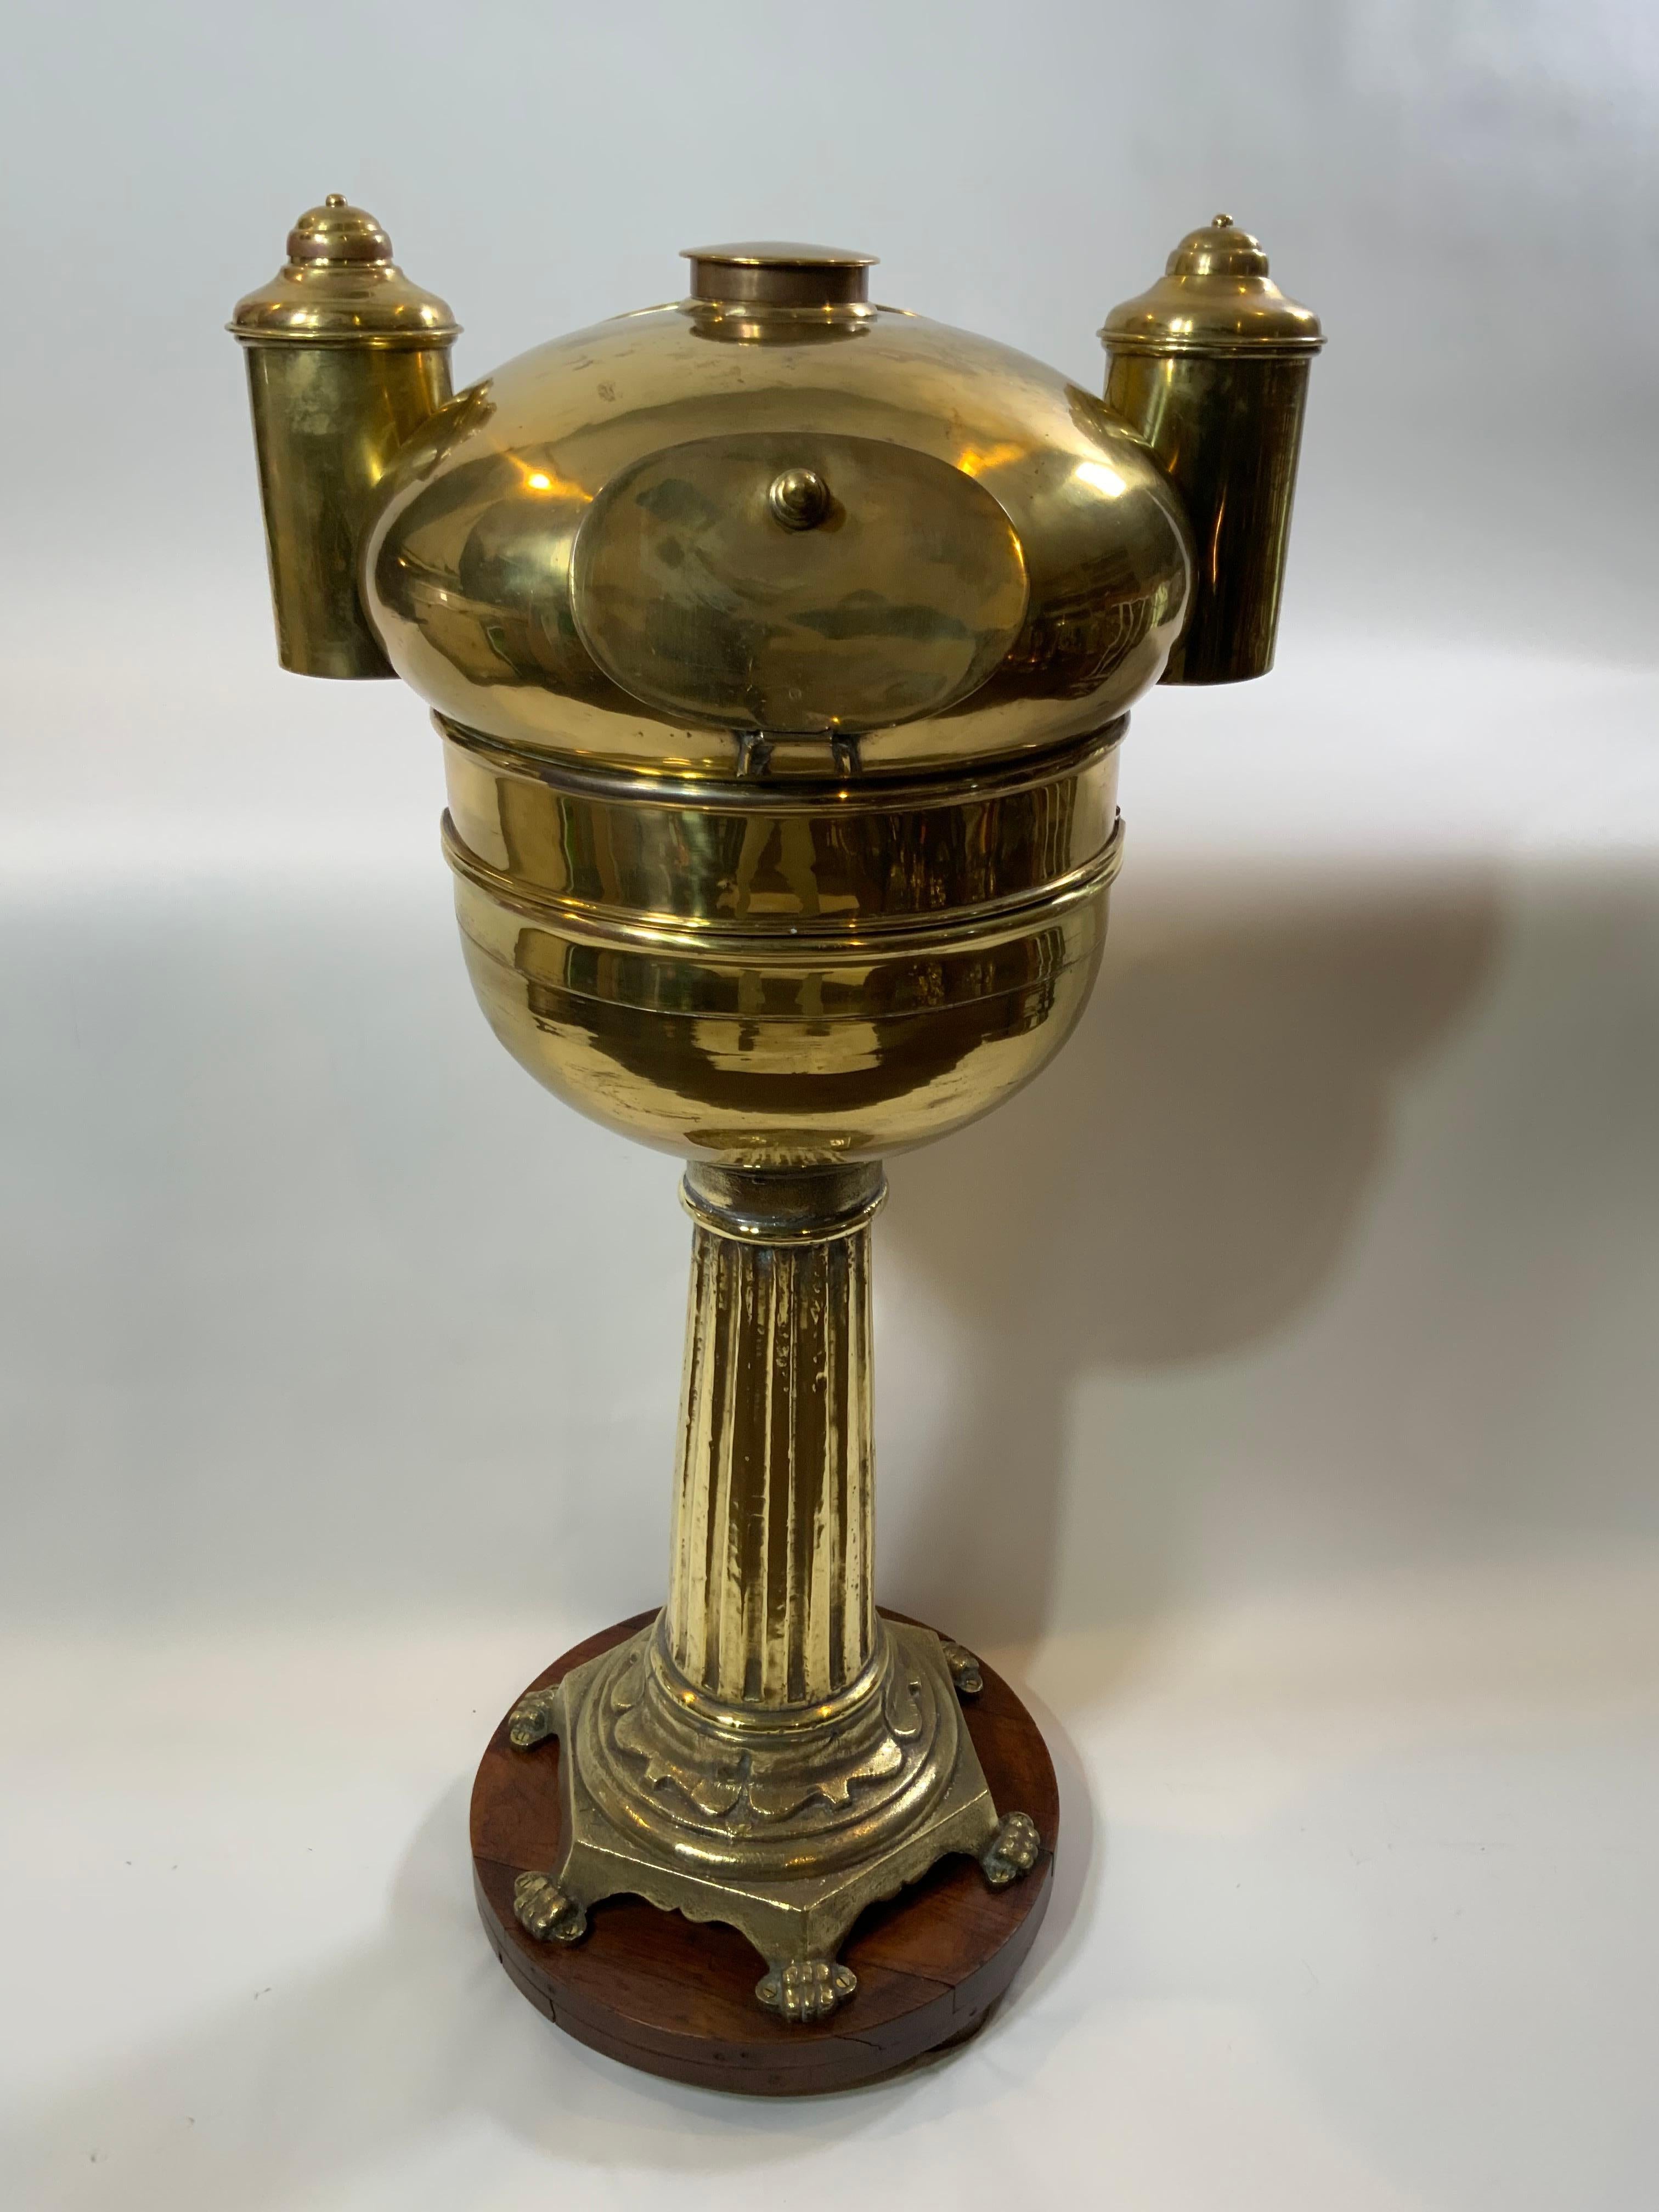 Brass Yacht Binnacle from Italy Circa 1880 with Dry Card Compass For Sale